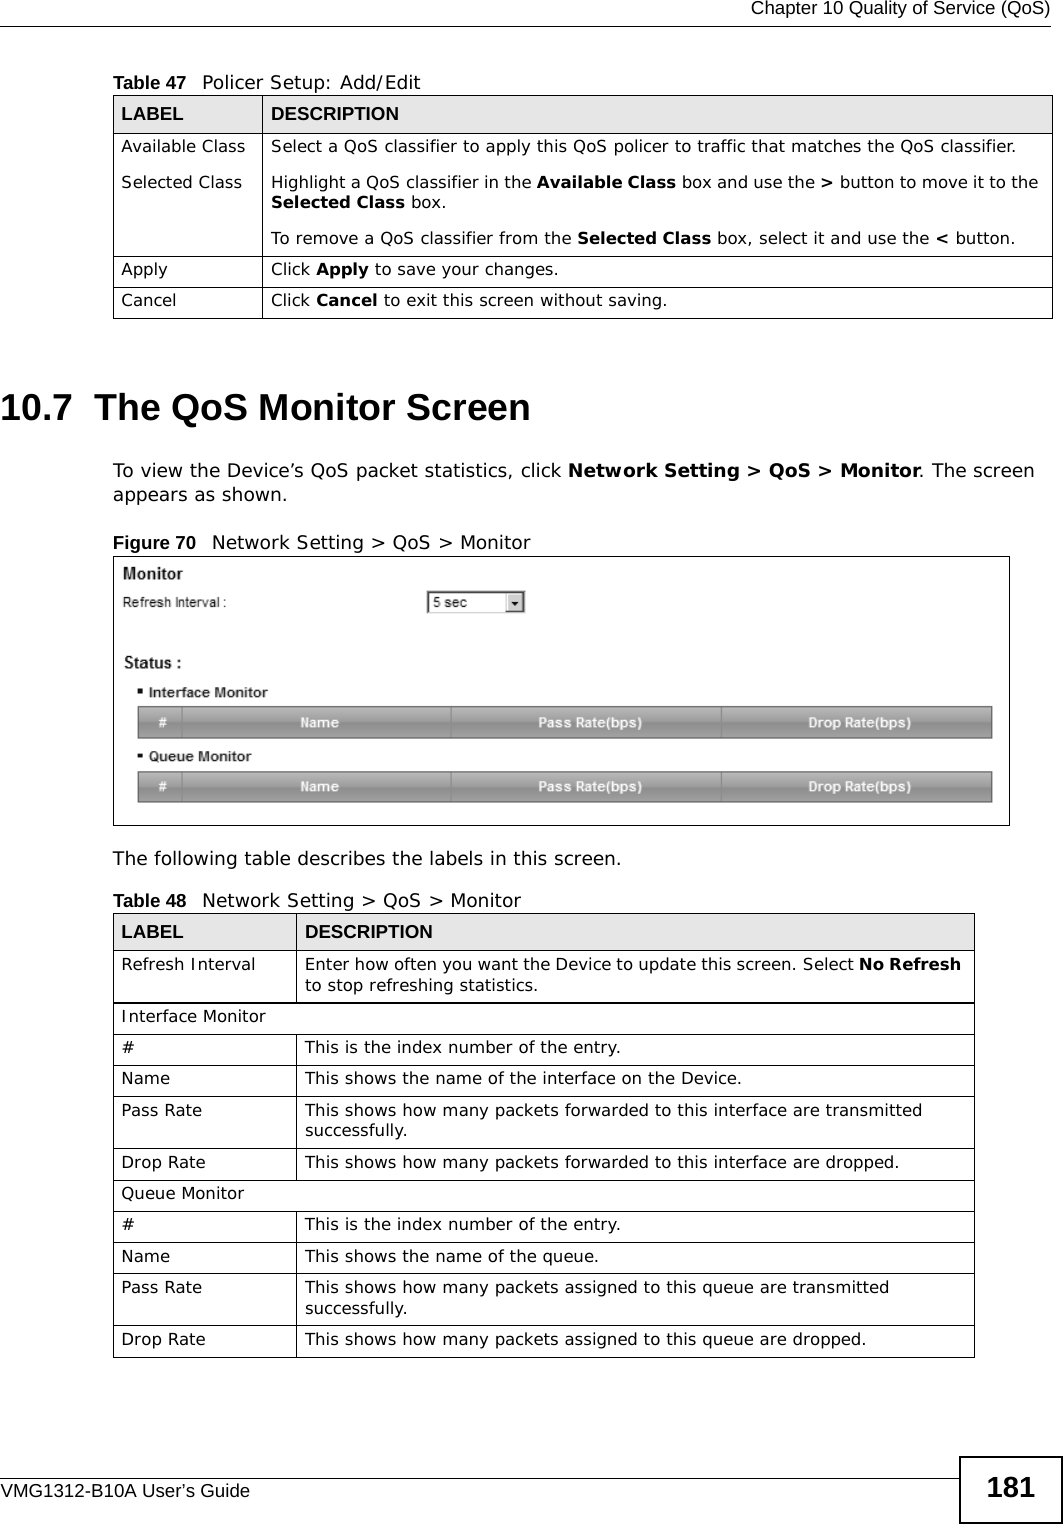  Chapter 10 Quality of Service (QoS)VMG1312-B10A User’s Guide 18110.7  The QoS Monitor Screen To view the Device’s QoS packet statistics, click Network Setting &gt; QoS &gt; Monitor. The screen appears as shown. Figure 70   Network Setting &gt; QoS &gt; Monitor The following table describes the labels in this screen.  Available ClassSelected Class Select a QoS classifier to apply this QoS policer to traffic that matches the QoS classifier.Highlight a QoS classifier in the Available Class box and use the &gt; button to move it to the Selected Class box.To remove a QoS classifier from the Selected Class box, select it and use the &lt; button.Apply Click Apply to save your changes.Cancel Click Cancel to exit this screen without saving.Table 47   Policer Setup: Add/EditLABEL DESCRIPTIONTable 48   Network Setting &gt; QoS &gt; MonitorLABEL DESCRIPTIONRefresh Interval Enter how often you want the Device to update this screen. Select No Refresh to stop refreshing statistics.Interface Monitor# This is the index number of the entry.Name This shows the name of the interface on the Device. Pass Rate This shows how many packets forwarded to this interface are transmitted successfully.Drop Rate This shows how many packets forwarded to this interface are dropped.Queue Monitor# This is the index number of the entry.Name This shows the name of the queue. Pass Rate This shows how many packets assigned to this queue are transmitted successfully.Drop Rate This shows how many packets assigned to this queue are dropped.